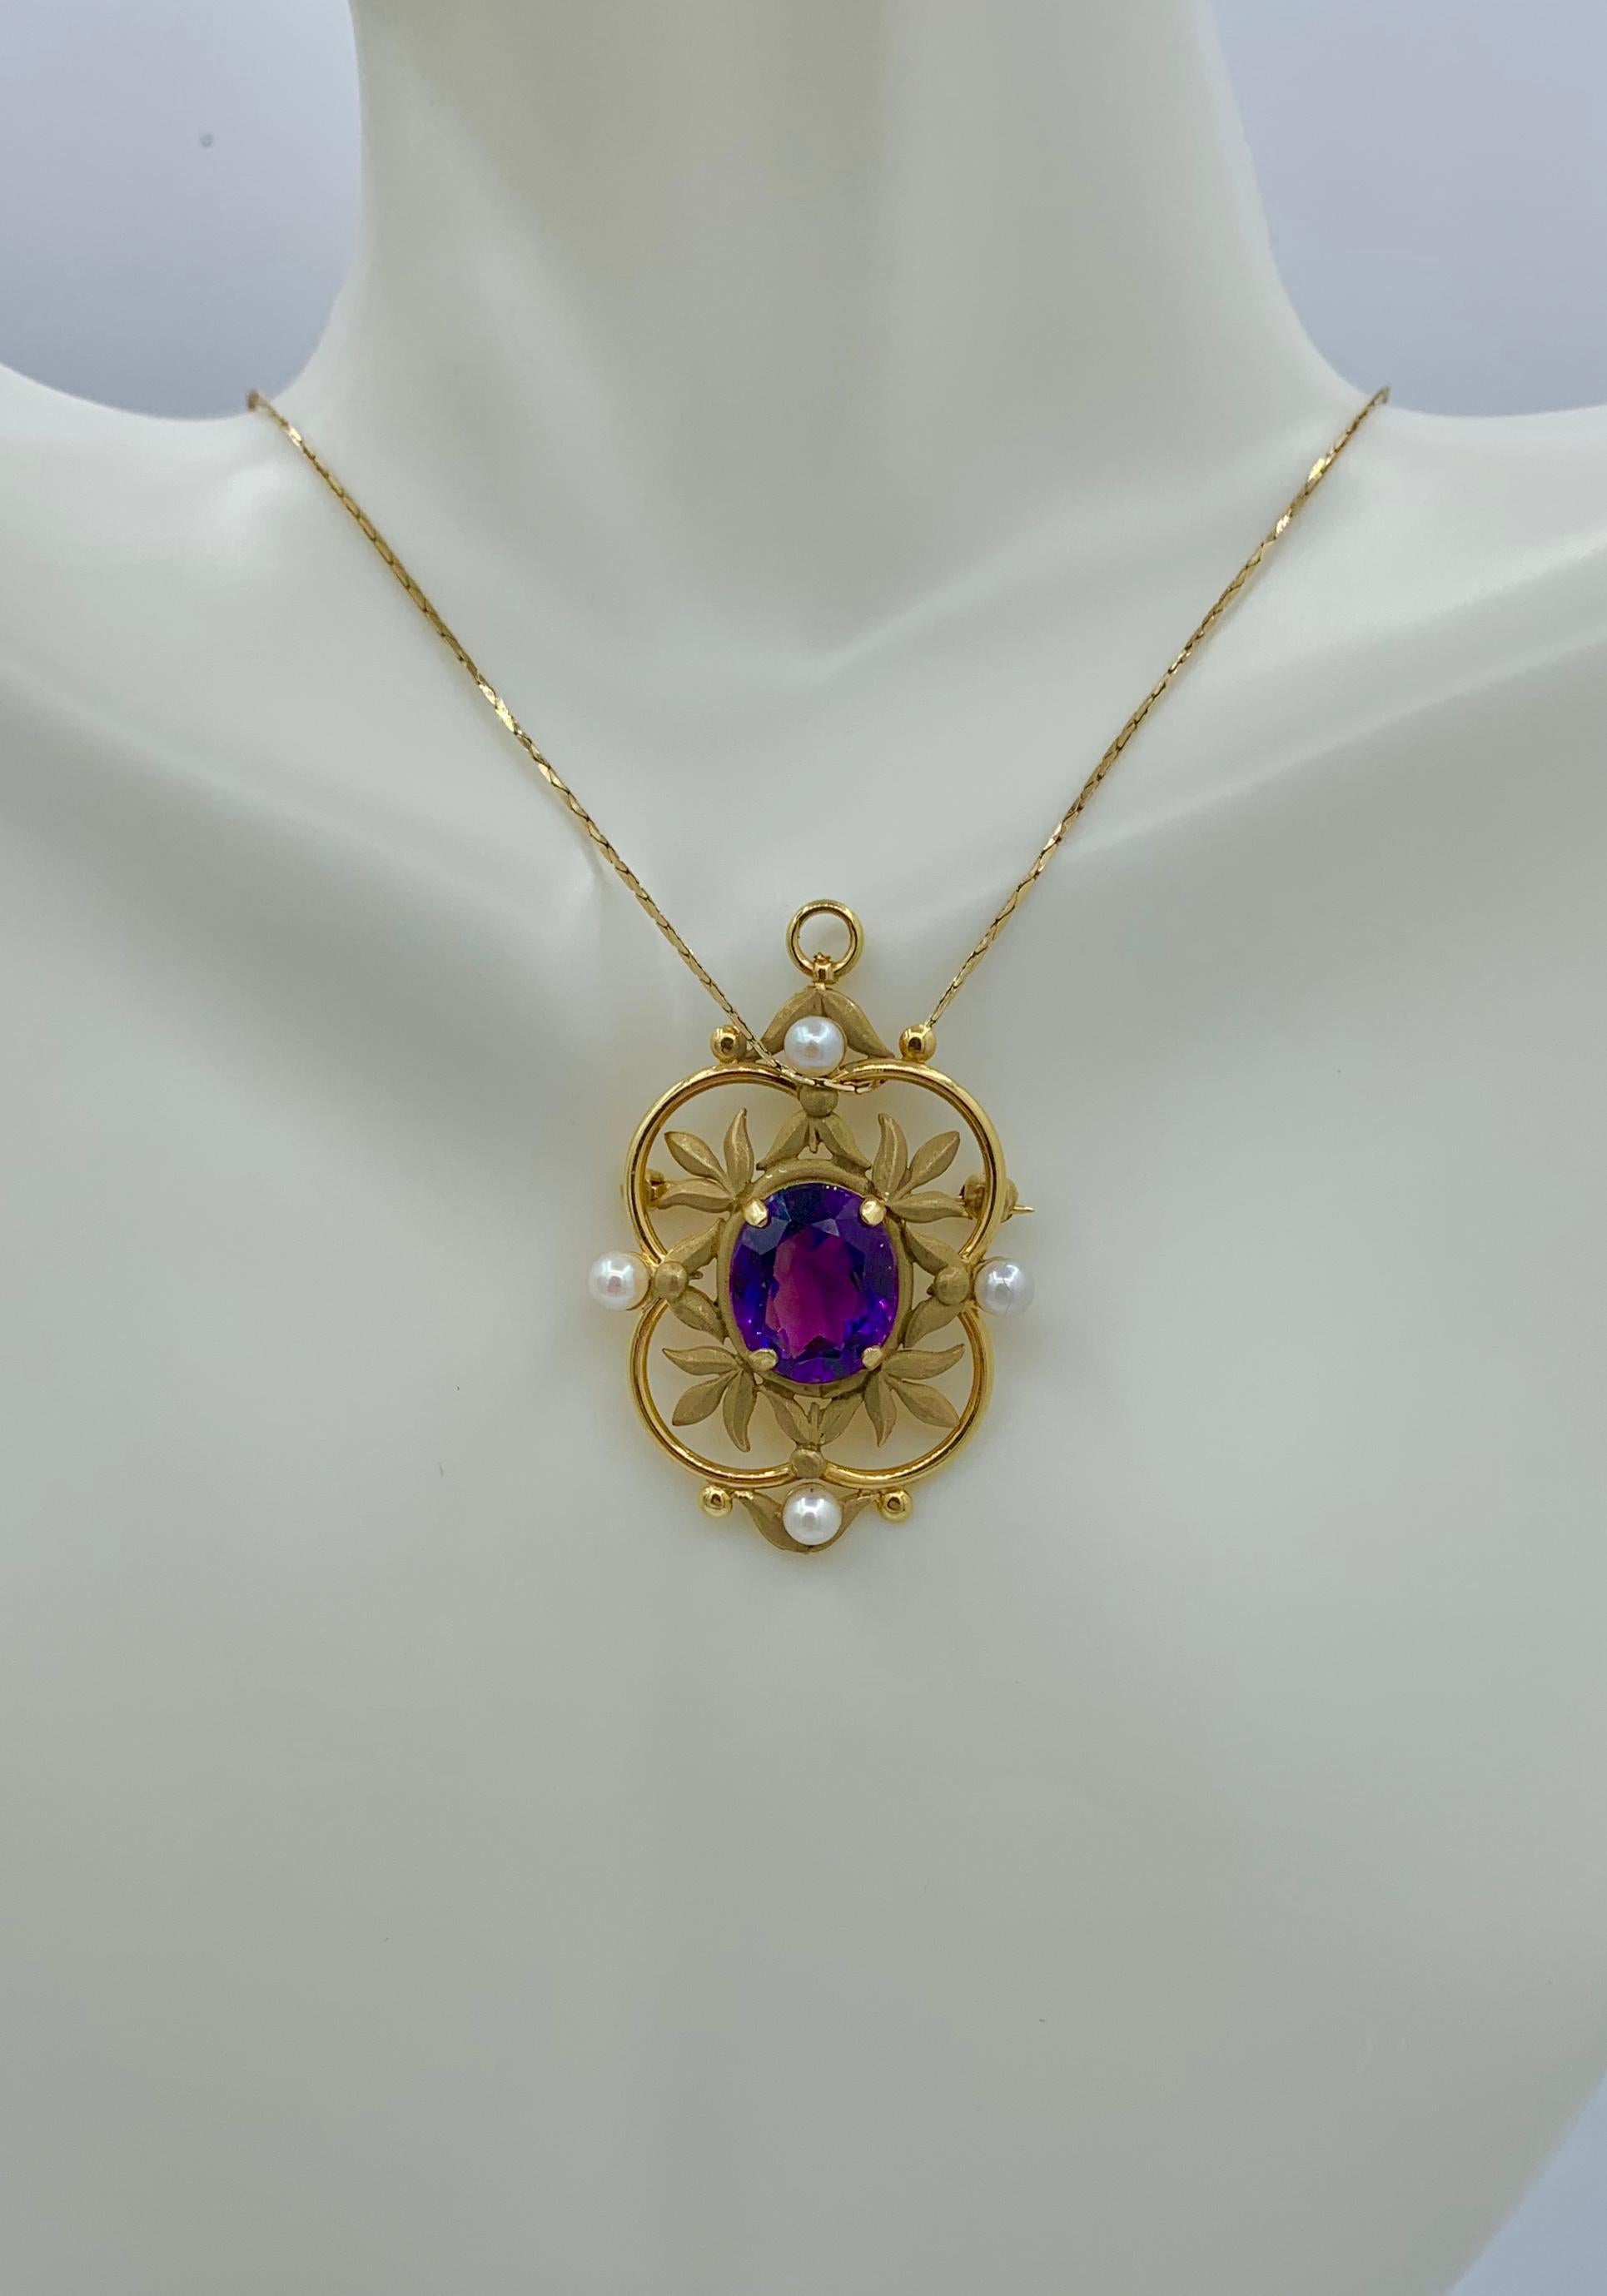 THIS IS A STUNNING VICTORIAN EDWARDIAN 3.8 CARAT OVAL FACETED SIBERIAN AMETHYST AND PEARL LAVALIERE PENDANT WITH THE MOST GORGEOUS NATURAL OVAL FACETED AMETHYST GEM SURROUNDED BY A GORGEOUS OPEN WORK LEAF MOTIF DESIGN IN GREEN GOLD WITH FOUR ELEGANT